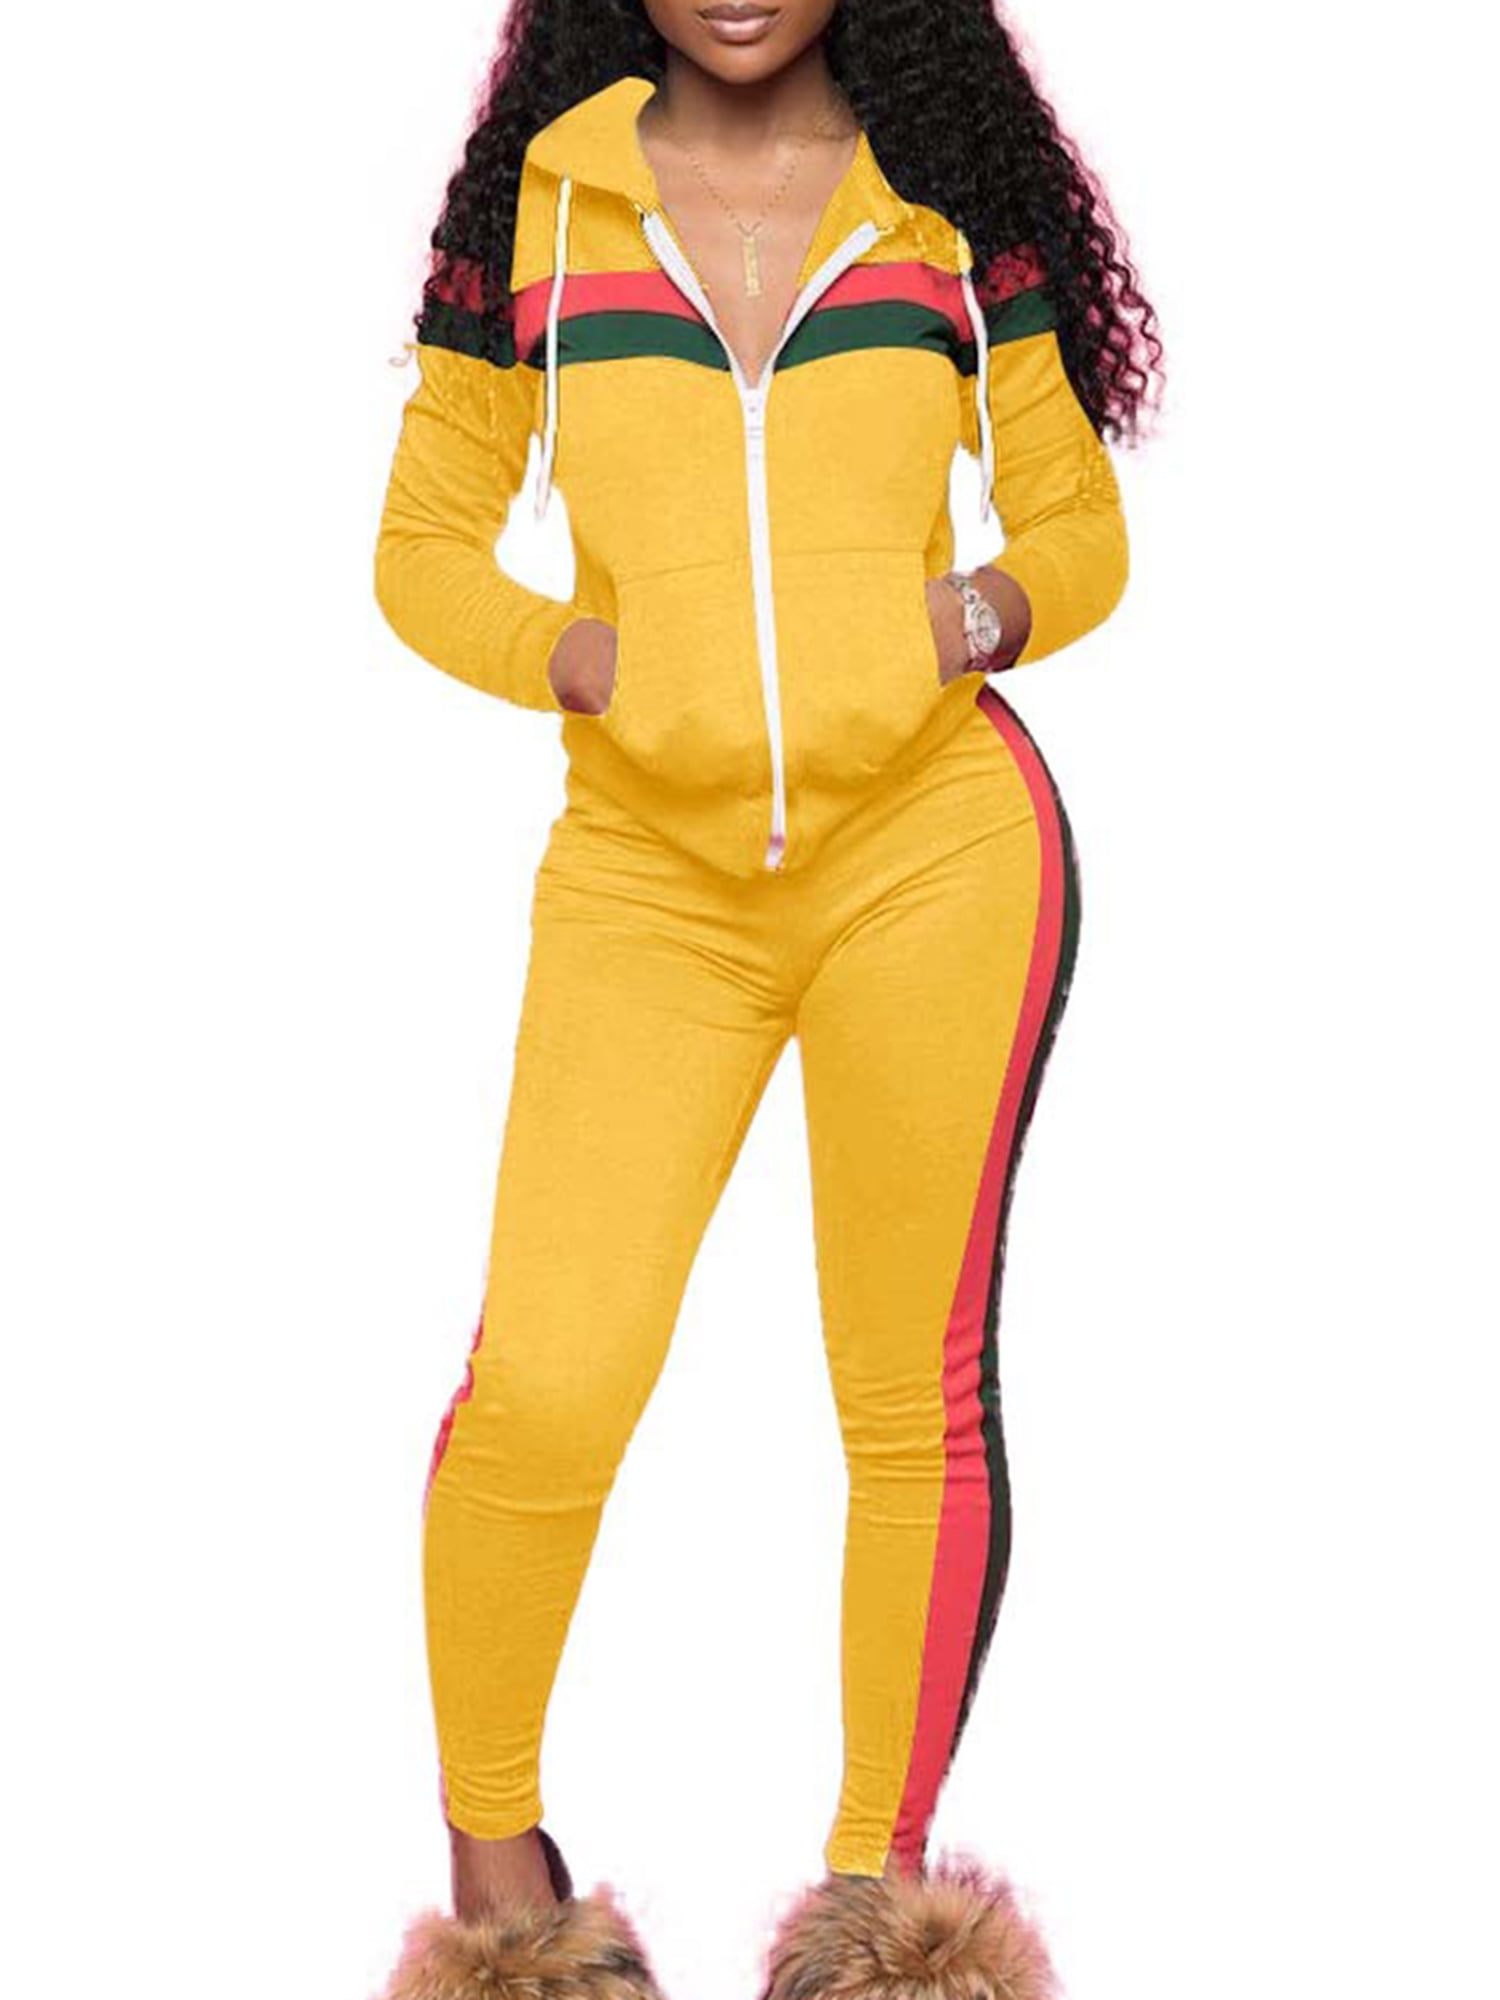 Women's Two Piece Outfits T-Shirts Bodycon Sports Suit Outfit Tracksuit Jumpsuits Sportswear Set